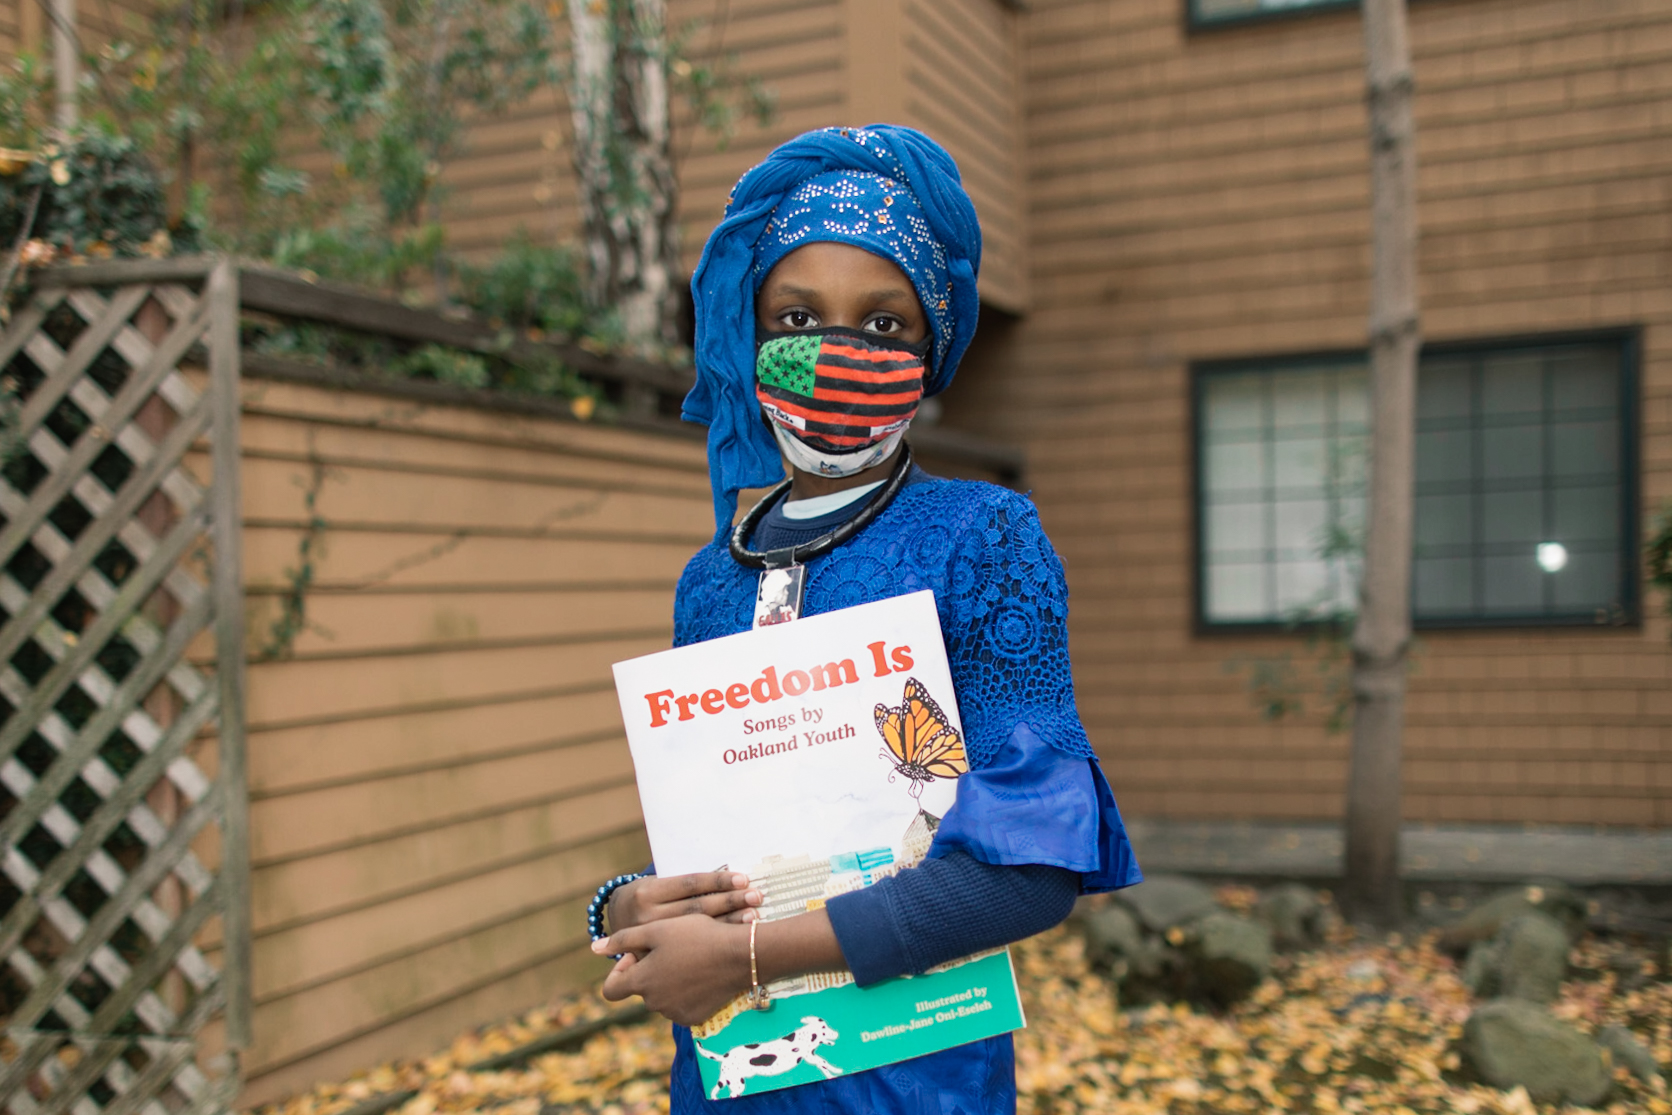 A youth writer named Nafissatou Ndiaye holding a copy of "Freedom Is," a companion book to a musical album of the same name, produced by the nonprofit Chapter 510